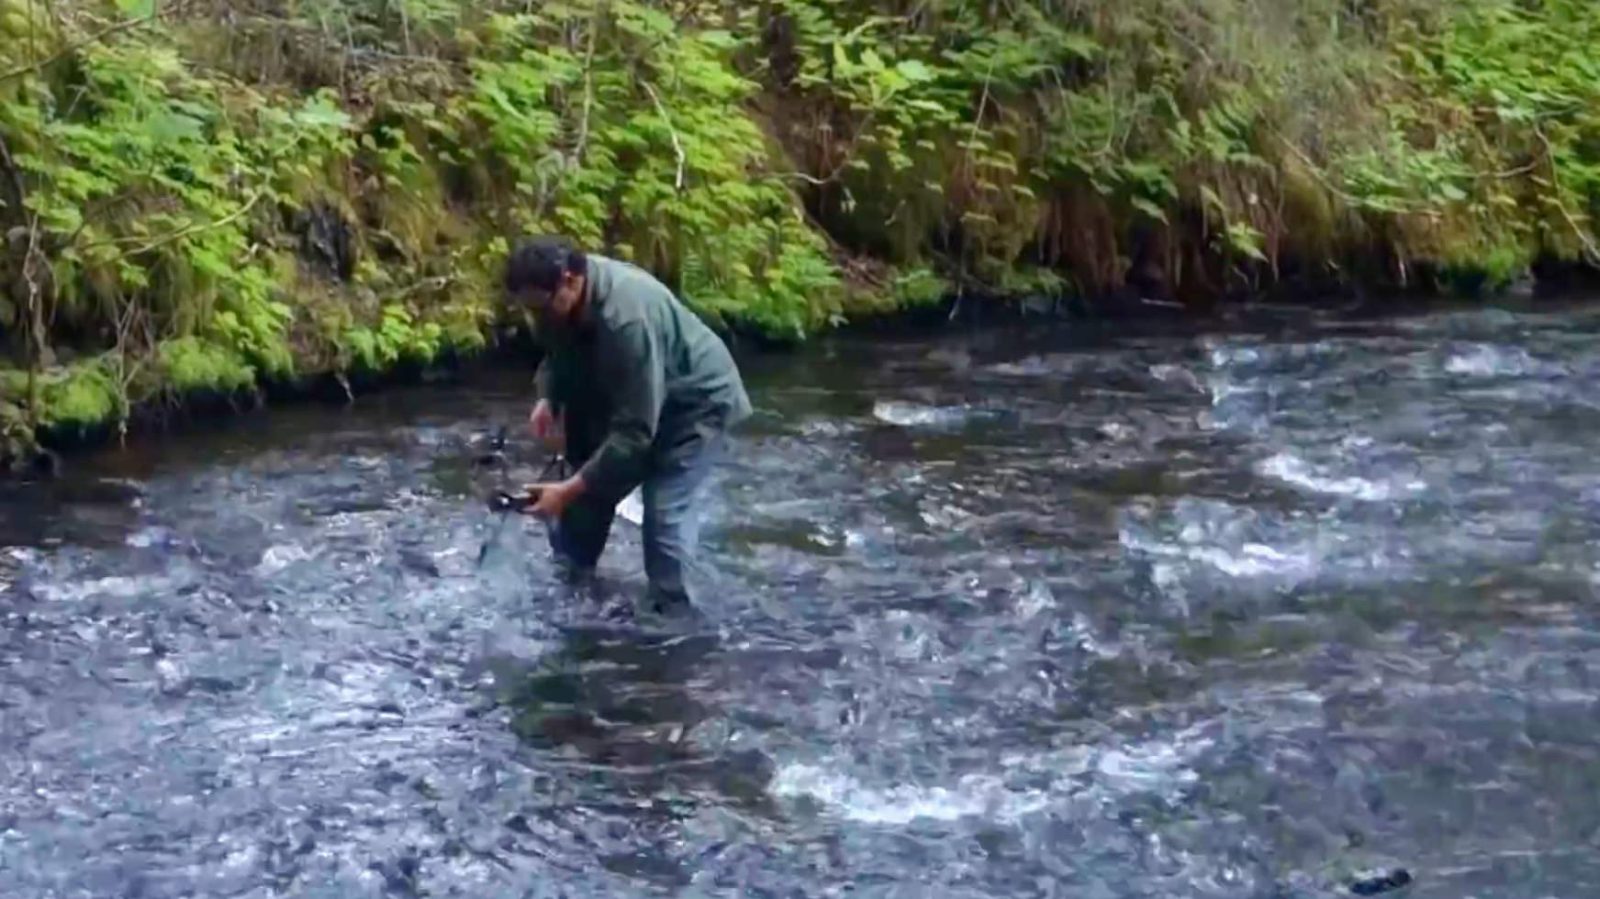 Man wades through water to recover DJI Mavic Pro from an Alaskan river. Will the drone ever fly again? [video]